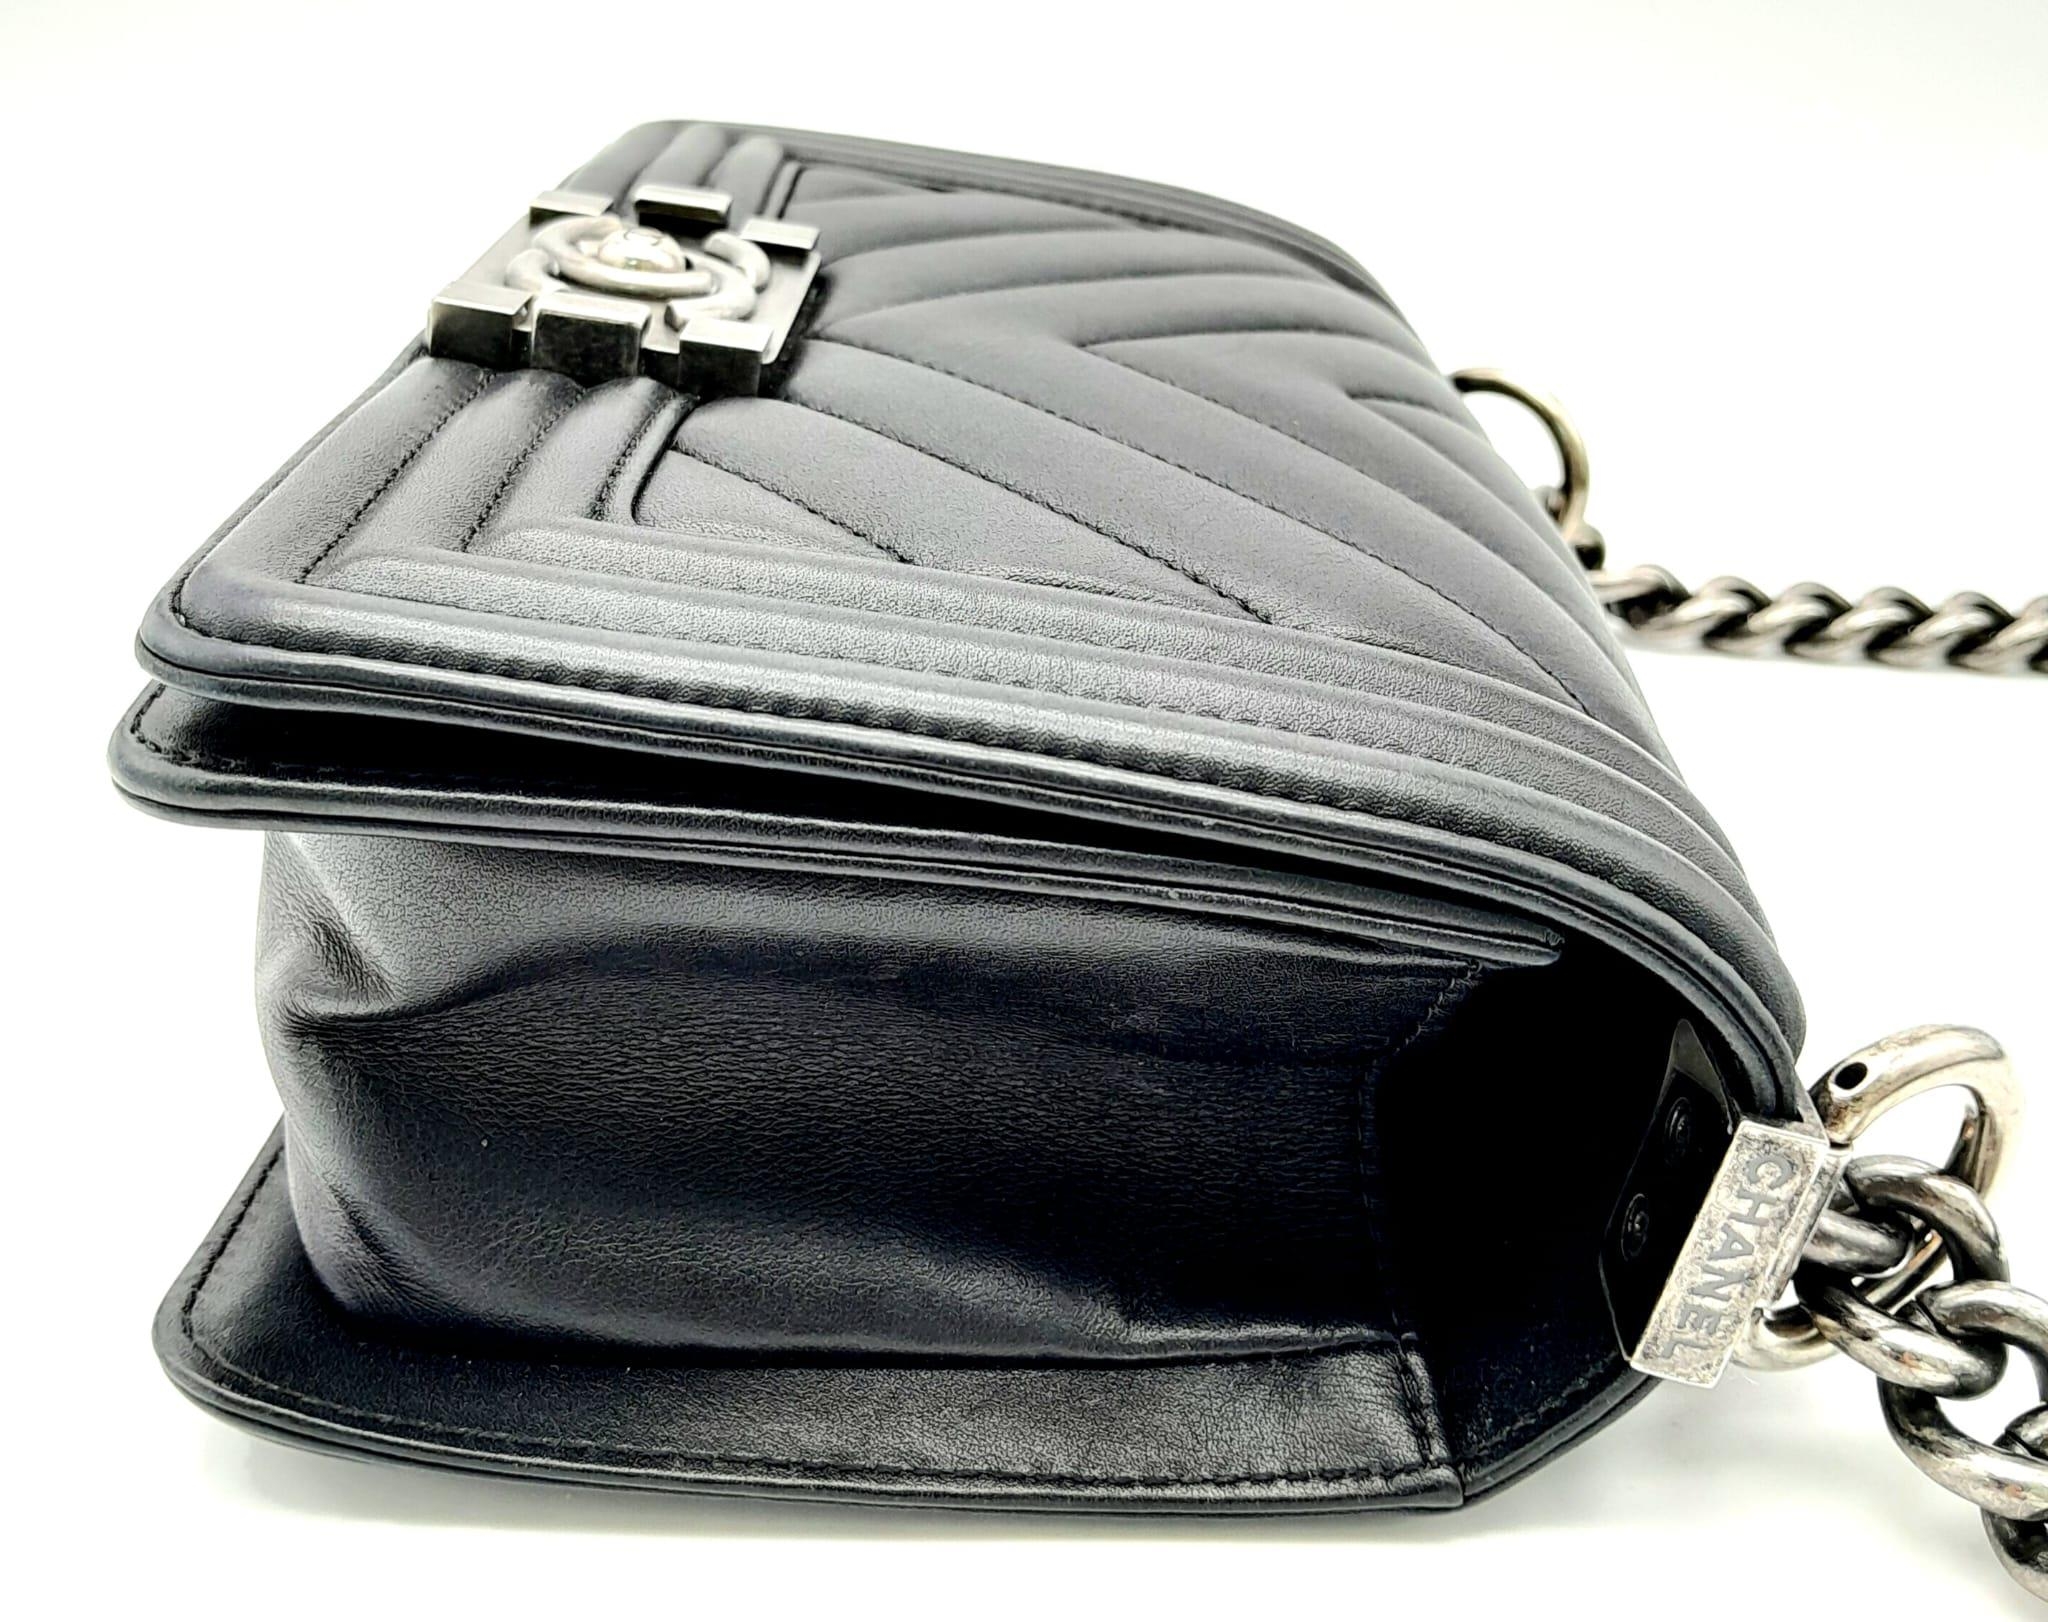 A Chanel Black Leather Boy Bag. Chevron decorative soft black leather with an antique style/finish - Image 3 of 12